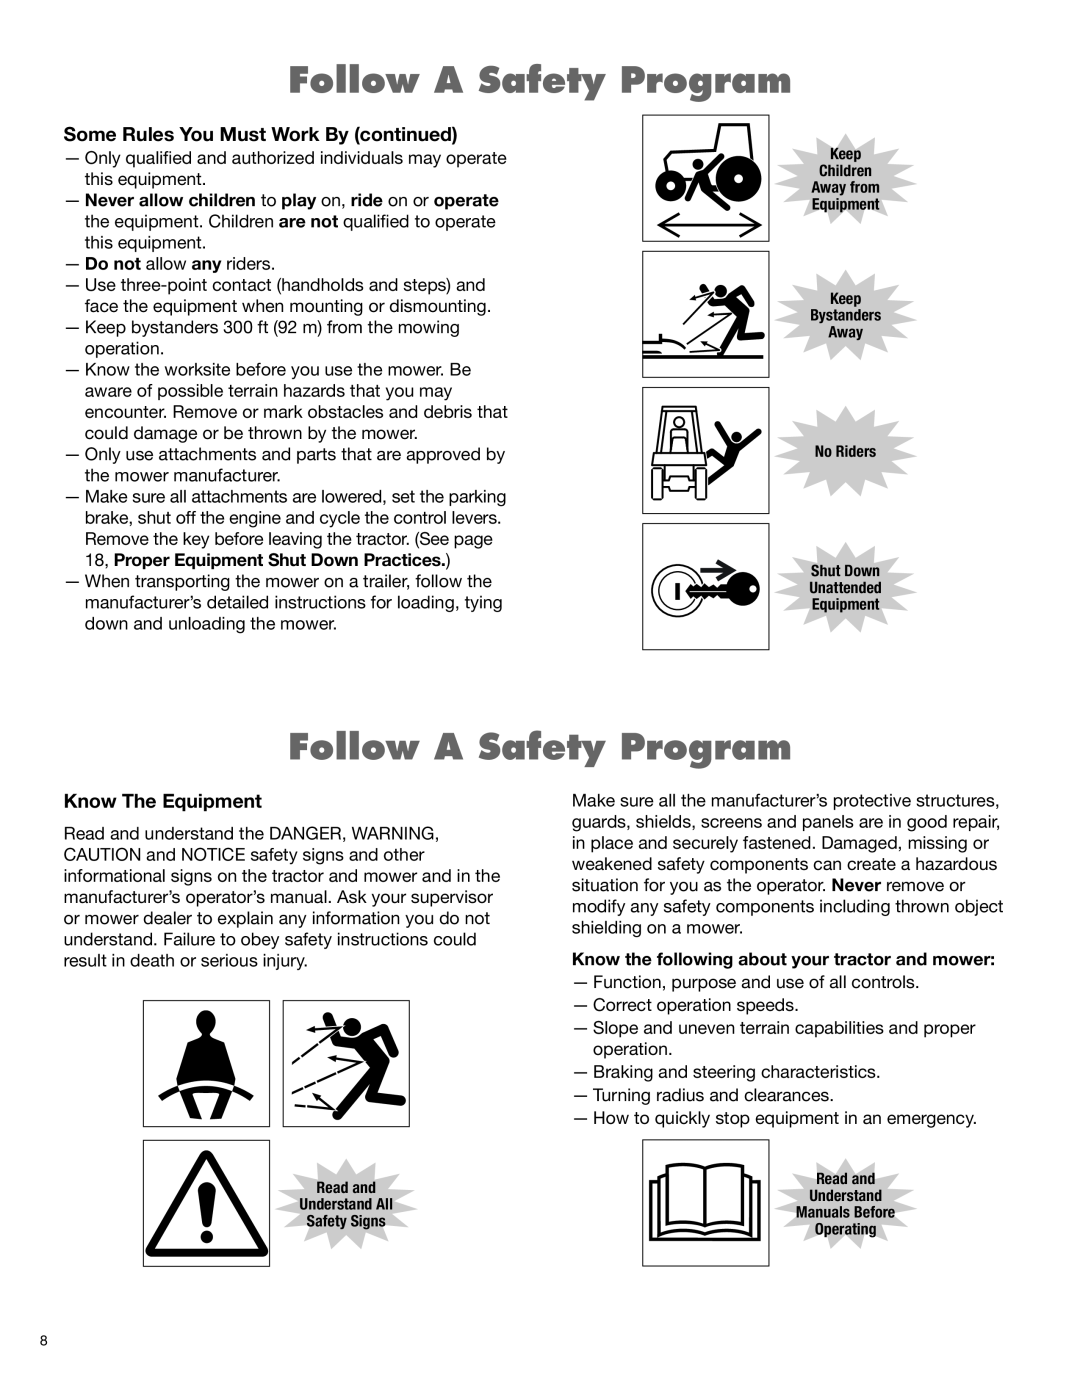 Rhino Mounts 148 manual Follow A Safety Program, Some Rules You Must Work By continued, Know The Equipment 